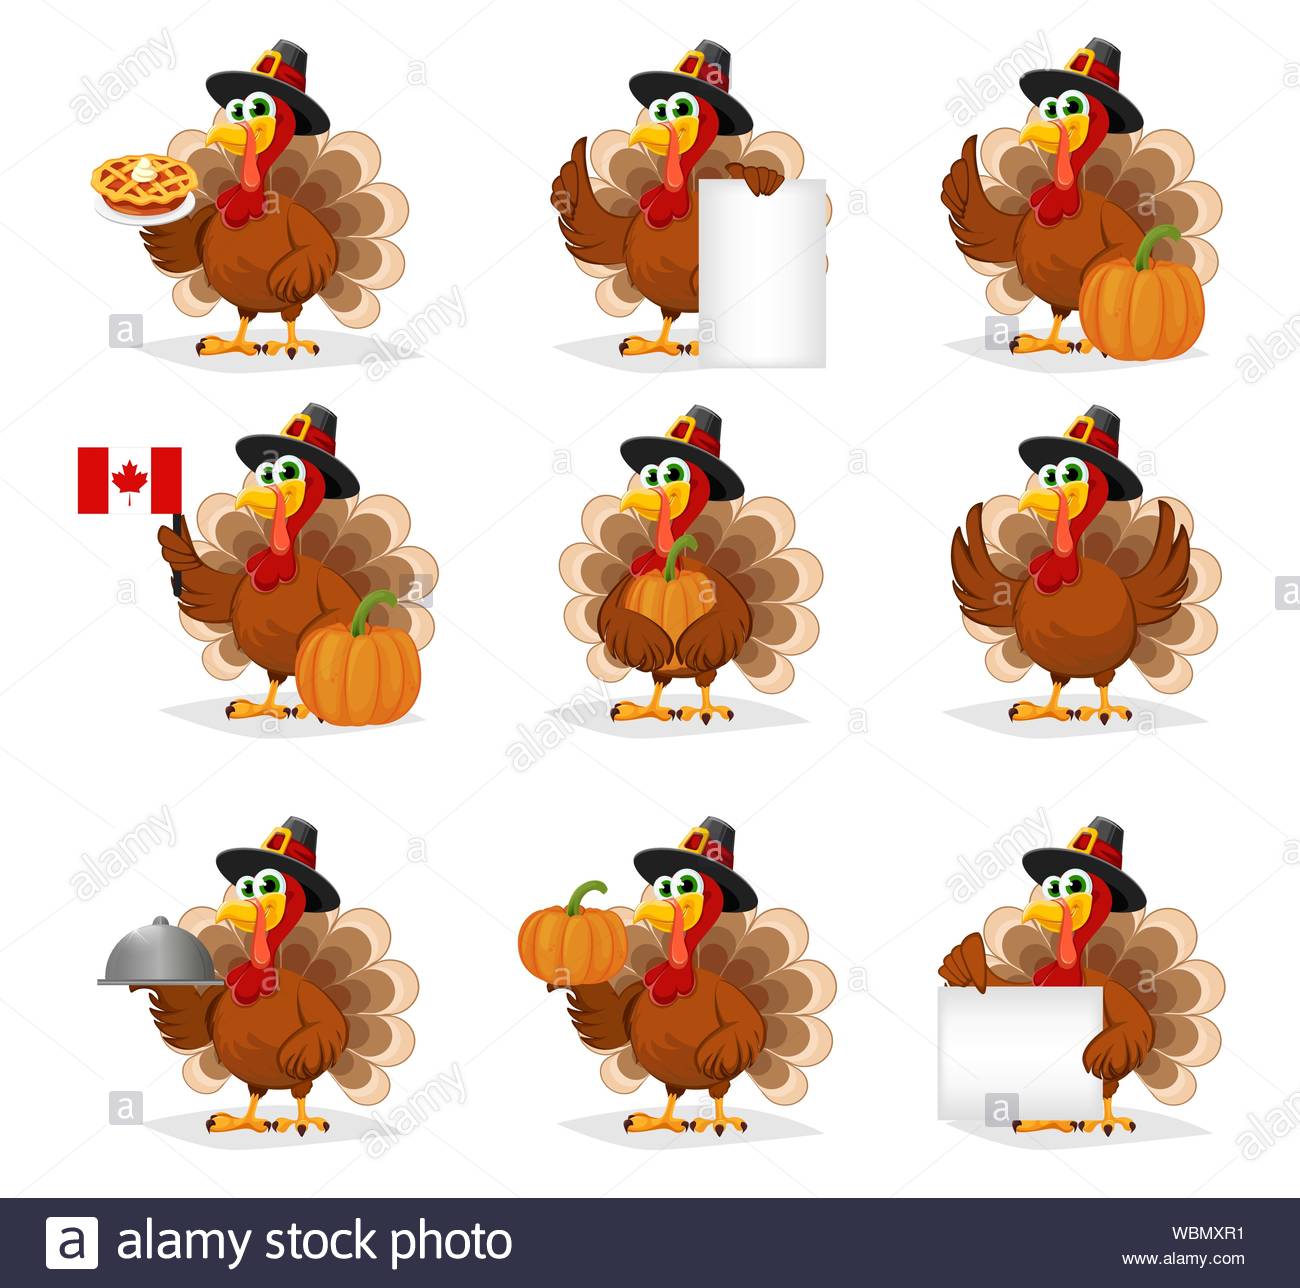 Thanksgiving Turkey Cartoon High Resolution Stock Photography And